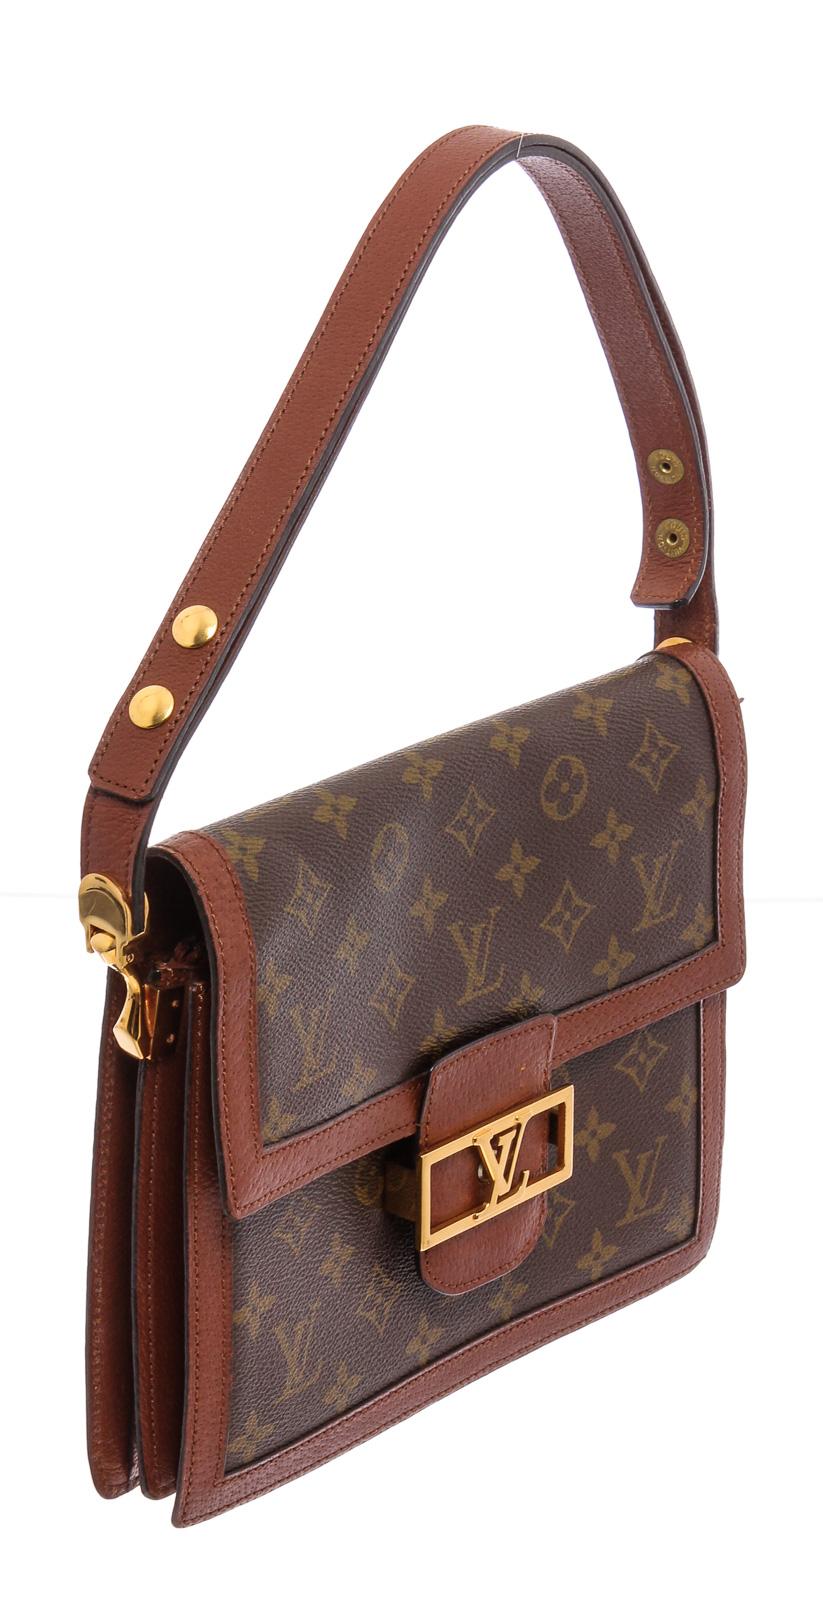 Brown leather Sac Dauphine shoulder bag from Louis Vuitton featuring a top handle, a foldover top with clasp closure, an internal slip pocket, an internal zipped pocket, an embossed internal logo stamp, a monogram pattern, gold-tone hardware, a